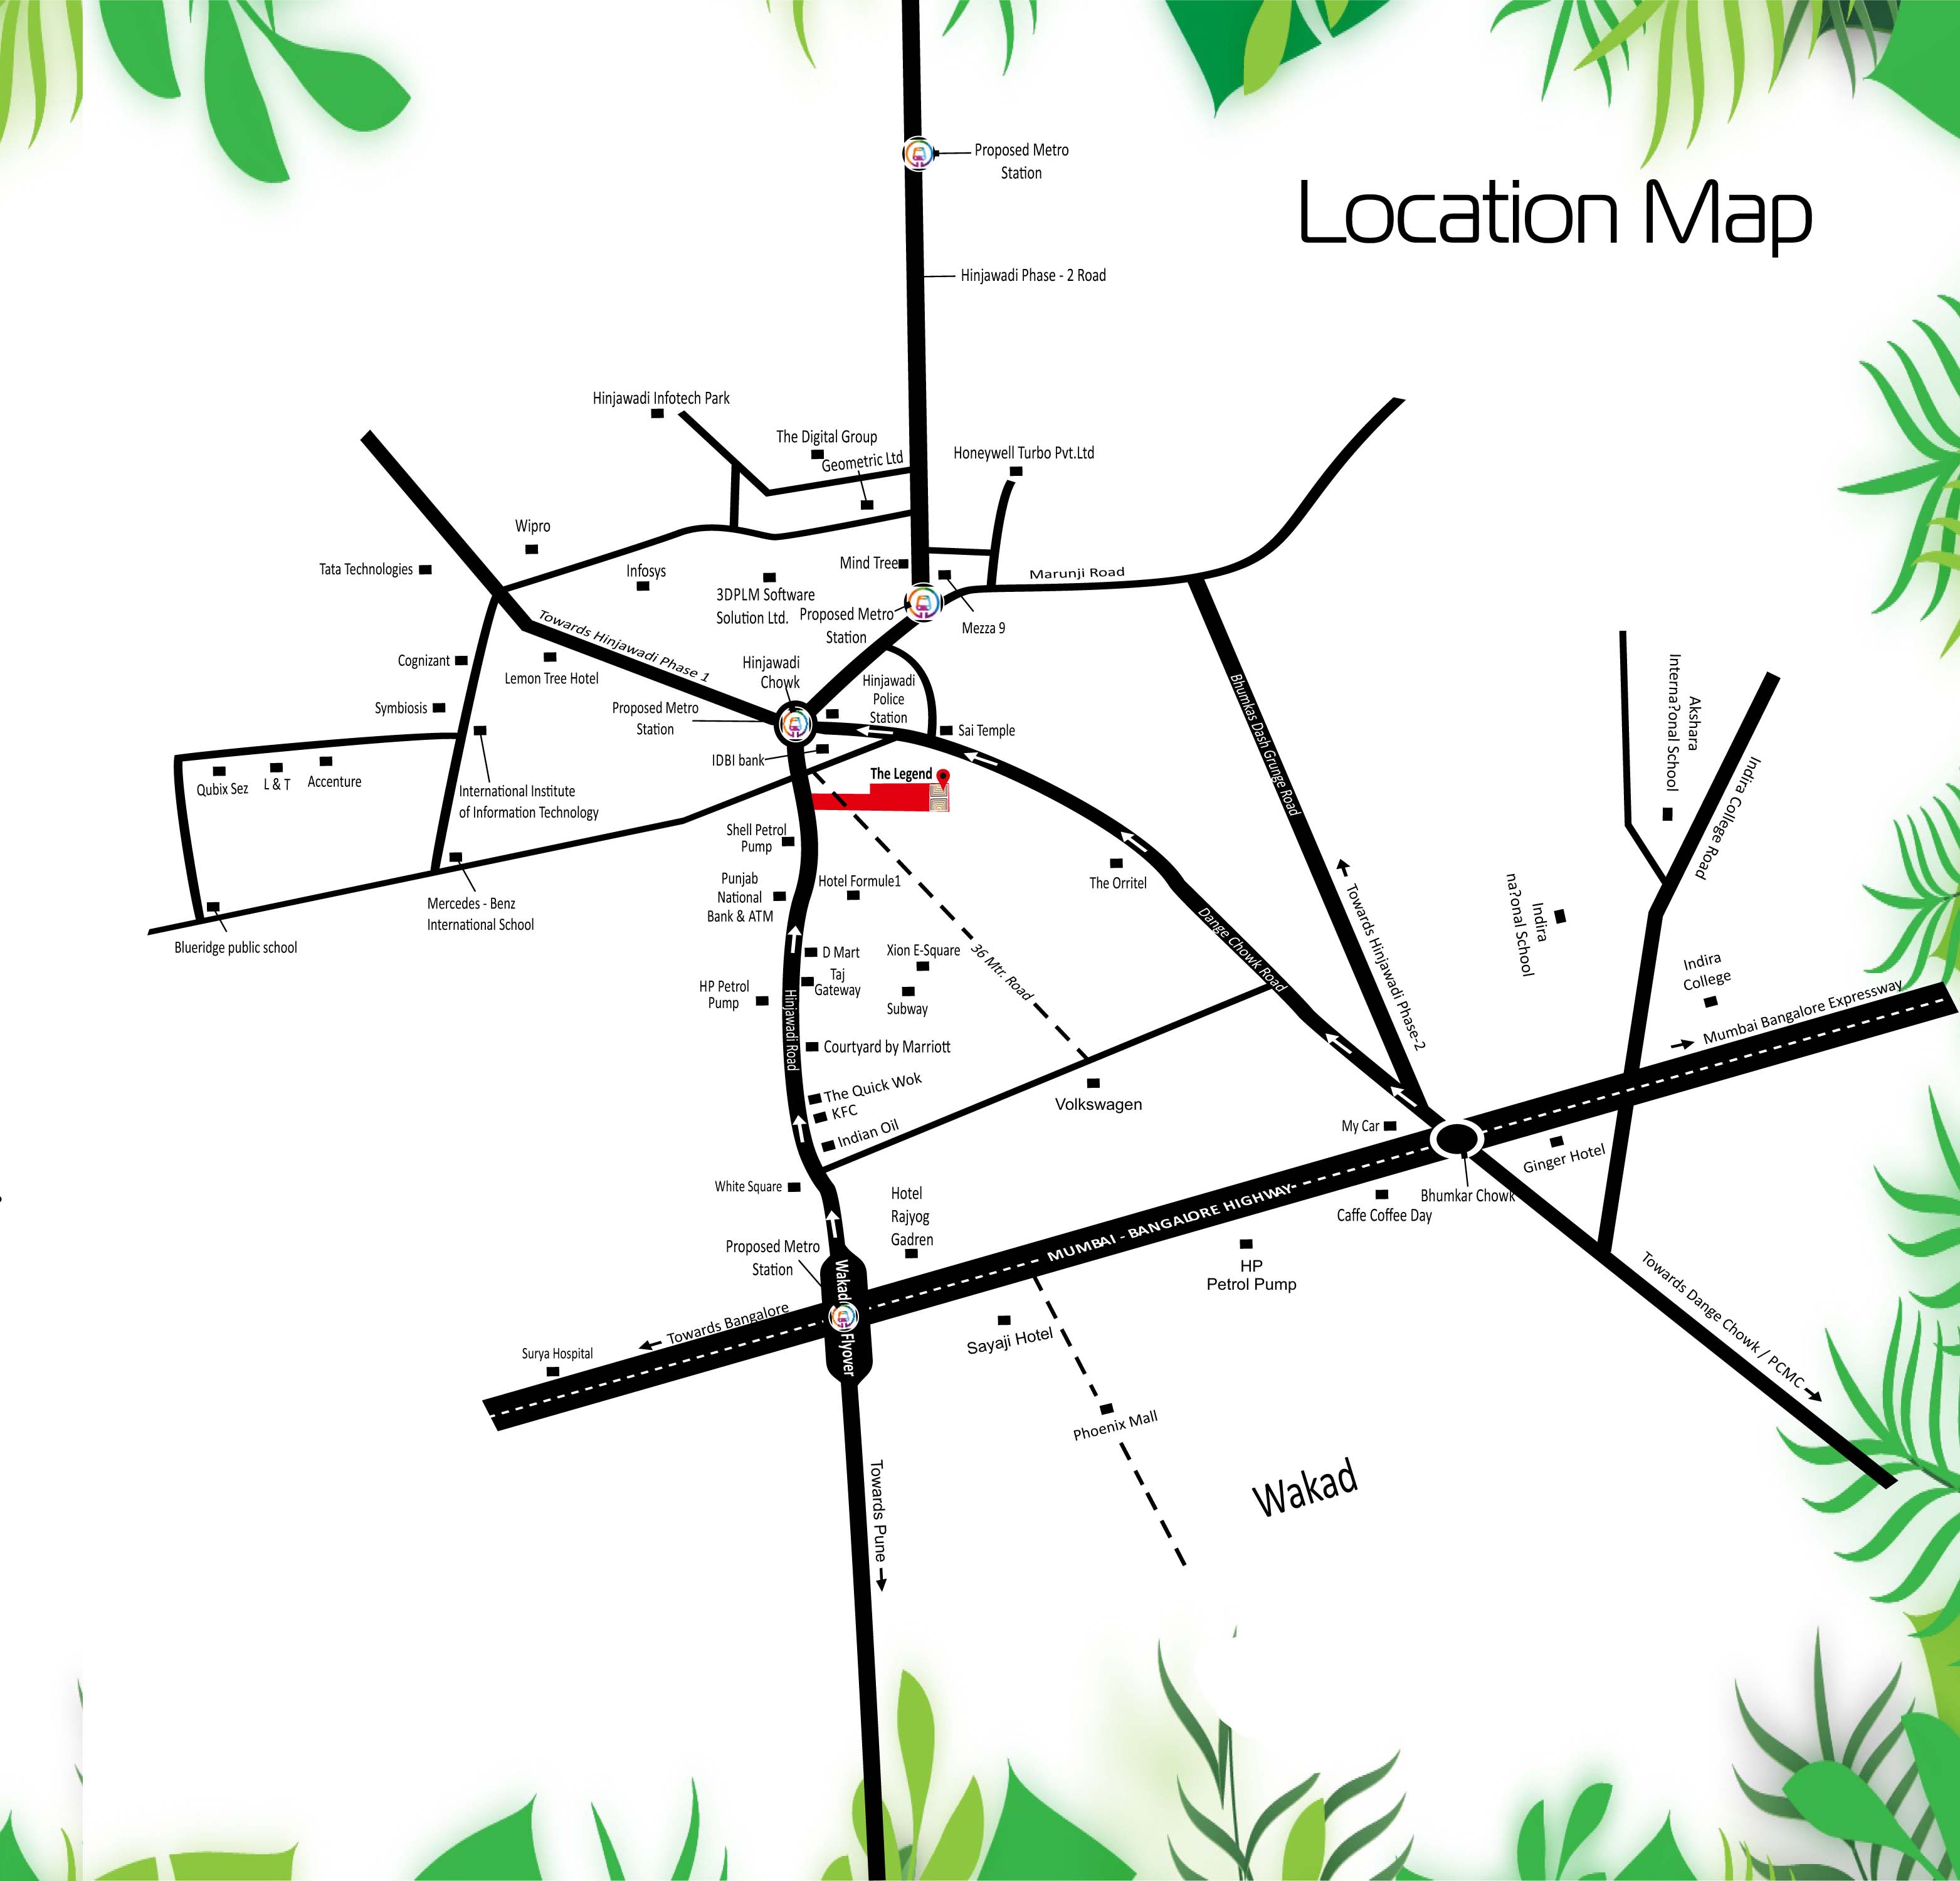 The Legend Location Map